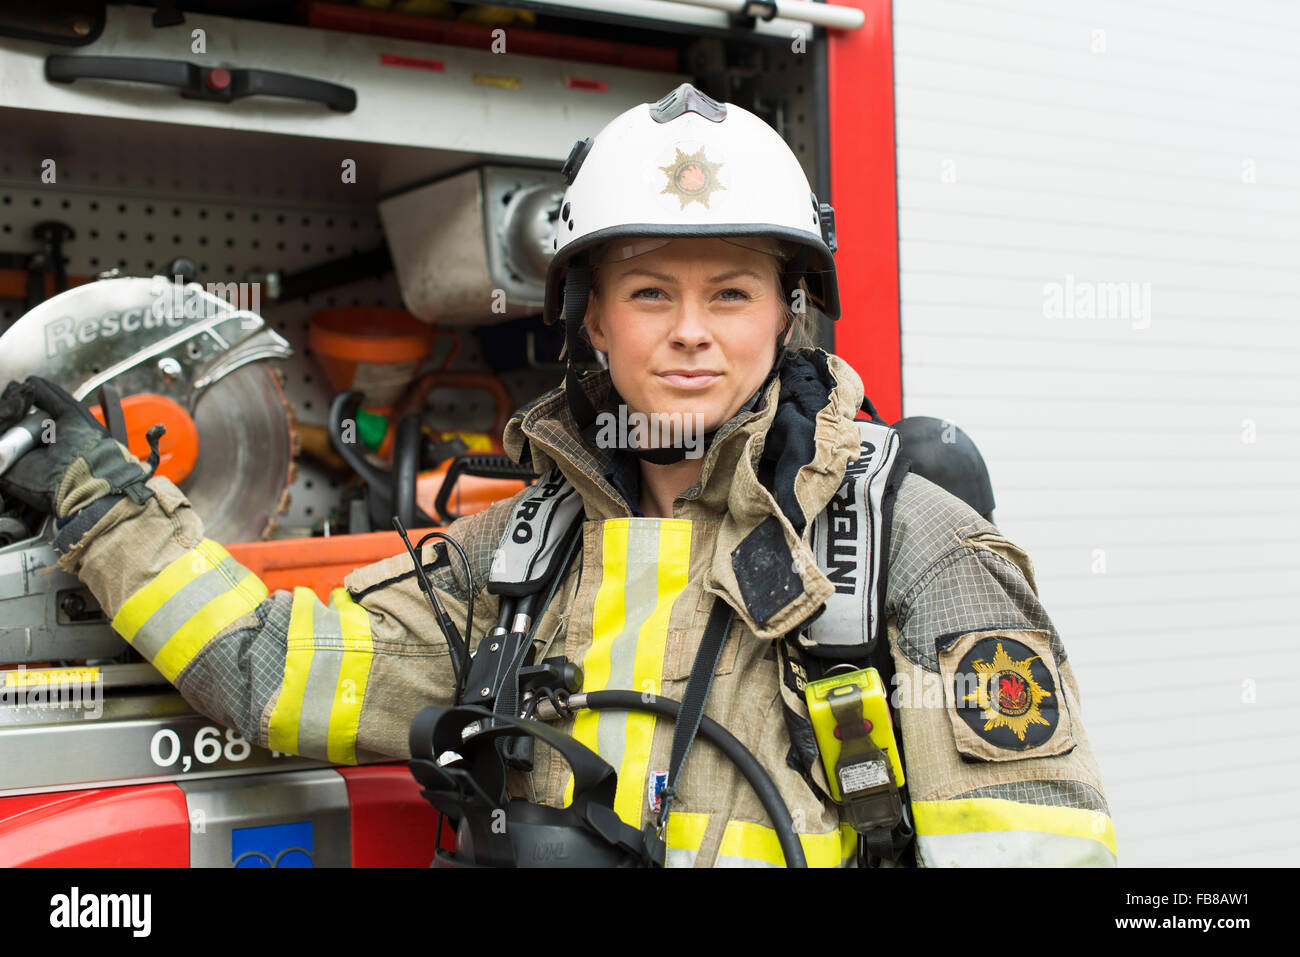 Sweden, Portrait of female firefighter by fire engine Stock Photo